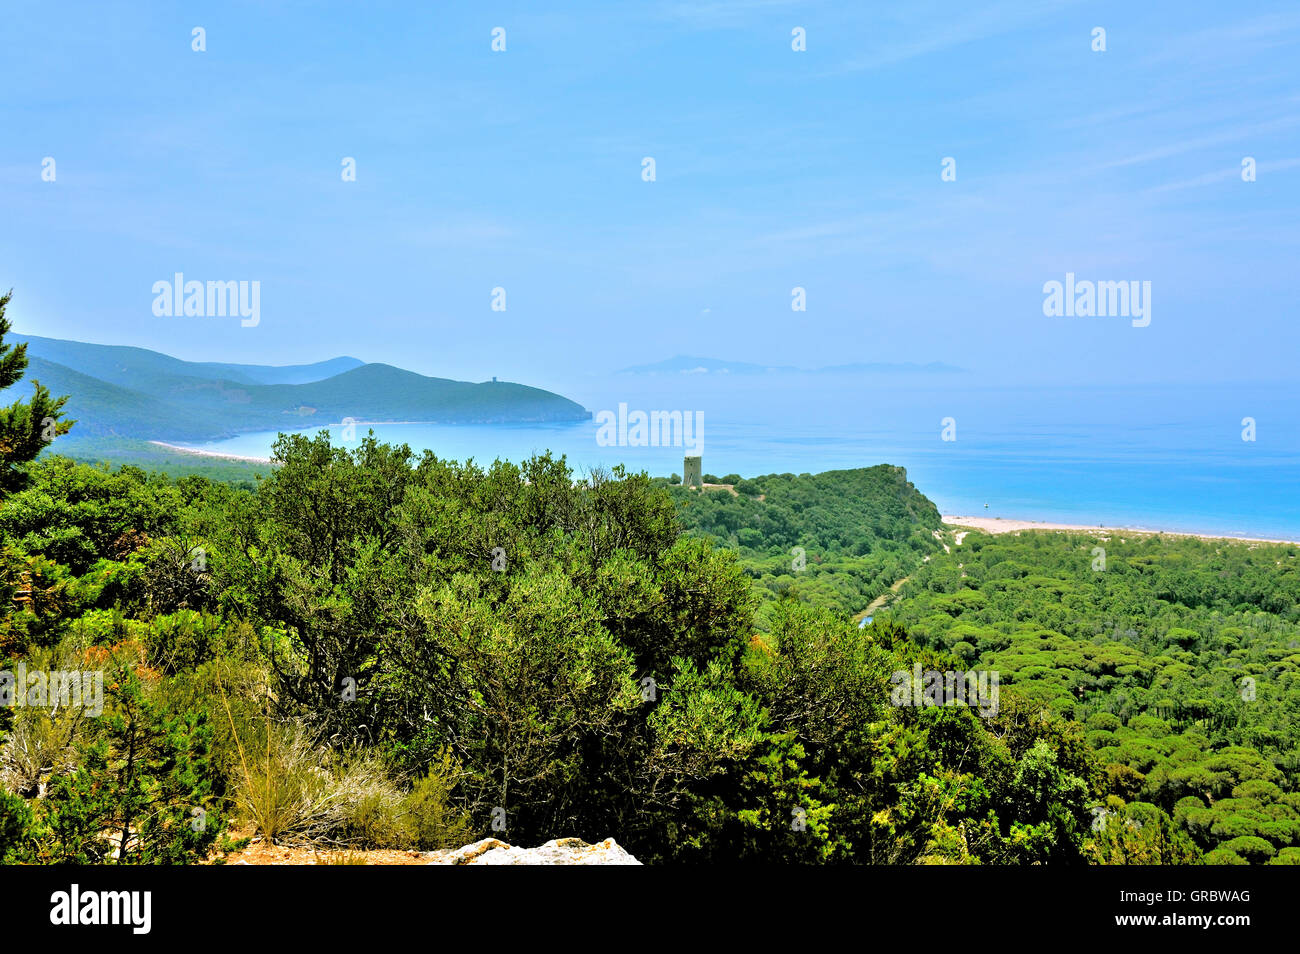 Typical Landscape Of Maremma With Watch Towers, Southern Tuscany, Acient Farming Land, Conquered Back By Nature, Italy, Mediterranean Sea Stock Photo